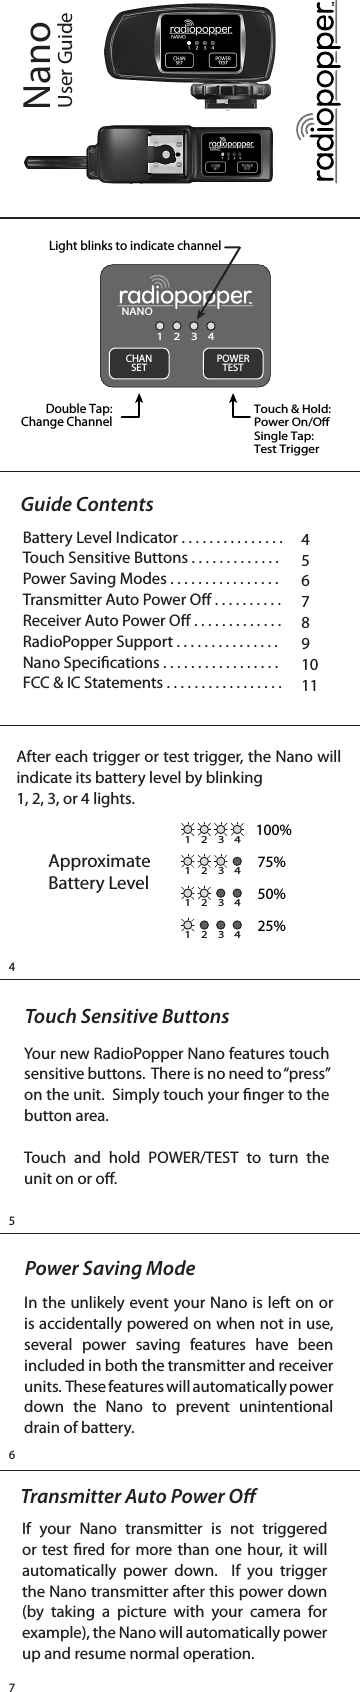 4567NanoUser GuideAfter each trigger or test trigger, the Nano will indicate its battery level by blinking 1, 2, 3, or 4 lights.Approximate Battery Level1 2 3 41 2 3 41 2 3 41 2 3 4100%75%50%25%Touch Sensitive ButtonsYour new RadioPopper Nano features touch sensitive buttons.  There is no need to “press” on the unit.  Simply touch your nger to the button area.Touch and hold POWER/TEST to turn the unit on or o.Power Saving ModeIn the unlikely event your Nano is left on or is accidentally powered on when not in use, several power saving features have been included in both the transmitter and receiver units.  These features will automatically power down the Nano to prevent unintentional drain of battery.Guide ContentsBattery Level Indicator . . . . . . . . . . . . . . .Touch Sensitive Buttons . . . . . . . . . . . . .Power Saving Modes . . . . . . . . . . . . . . . .Transmitter Auto Power O . . . . . . . . . .Receiver Auto Power O . . . . . . . . . . . . .RadioPopper Support . . . . . . . . . . . . . . .Nano Specications . . . . . . . . . . . . . . . . . FCC &amp; IC Statements . . . . . . . . . . . . . . . . .4567891011NANO1 2 3 4CHANSET POWERTESTDouble Tap:Change ChannelTouch &amp; Hold:Power On/OSingle Tap:Test TriggerLight blinks to indicate channelTransmitter Auto Power OIf your Nano transmitter is not triggered or test red for more than one hour, it will automatically power down.  If you trigger the Nano transmitter after this power down (by taking a picture with your camera for example), the Nano will automatically power up and resume normal operation.